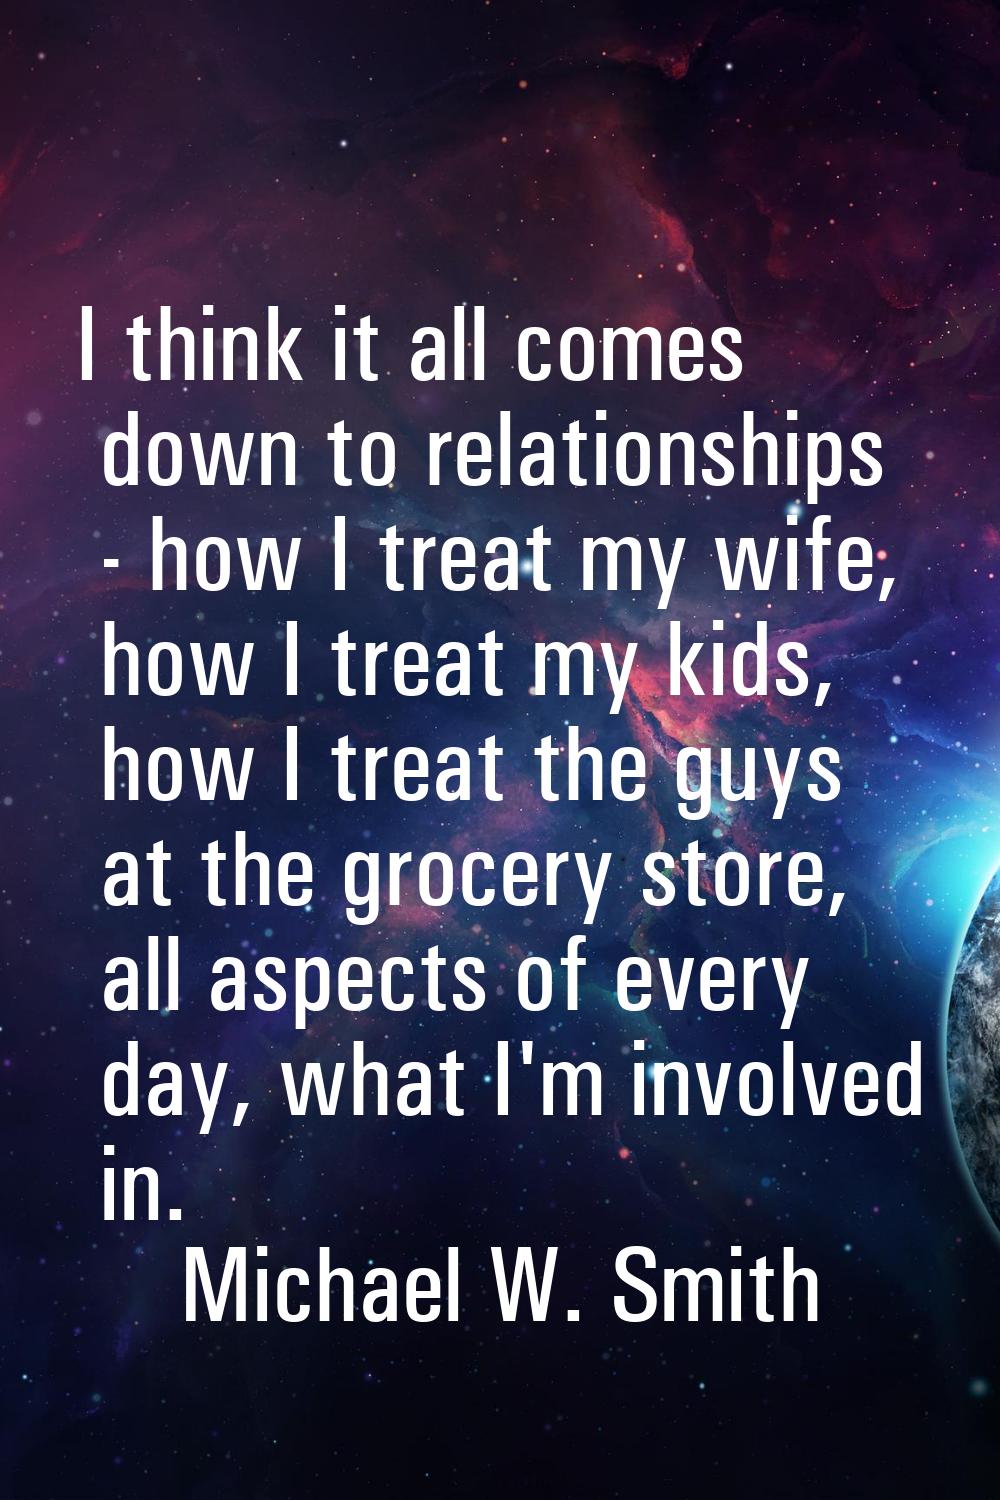 I think it all comes down to relationships - how I treat my wife, how I treat my kids, how I treat 